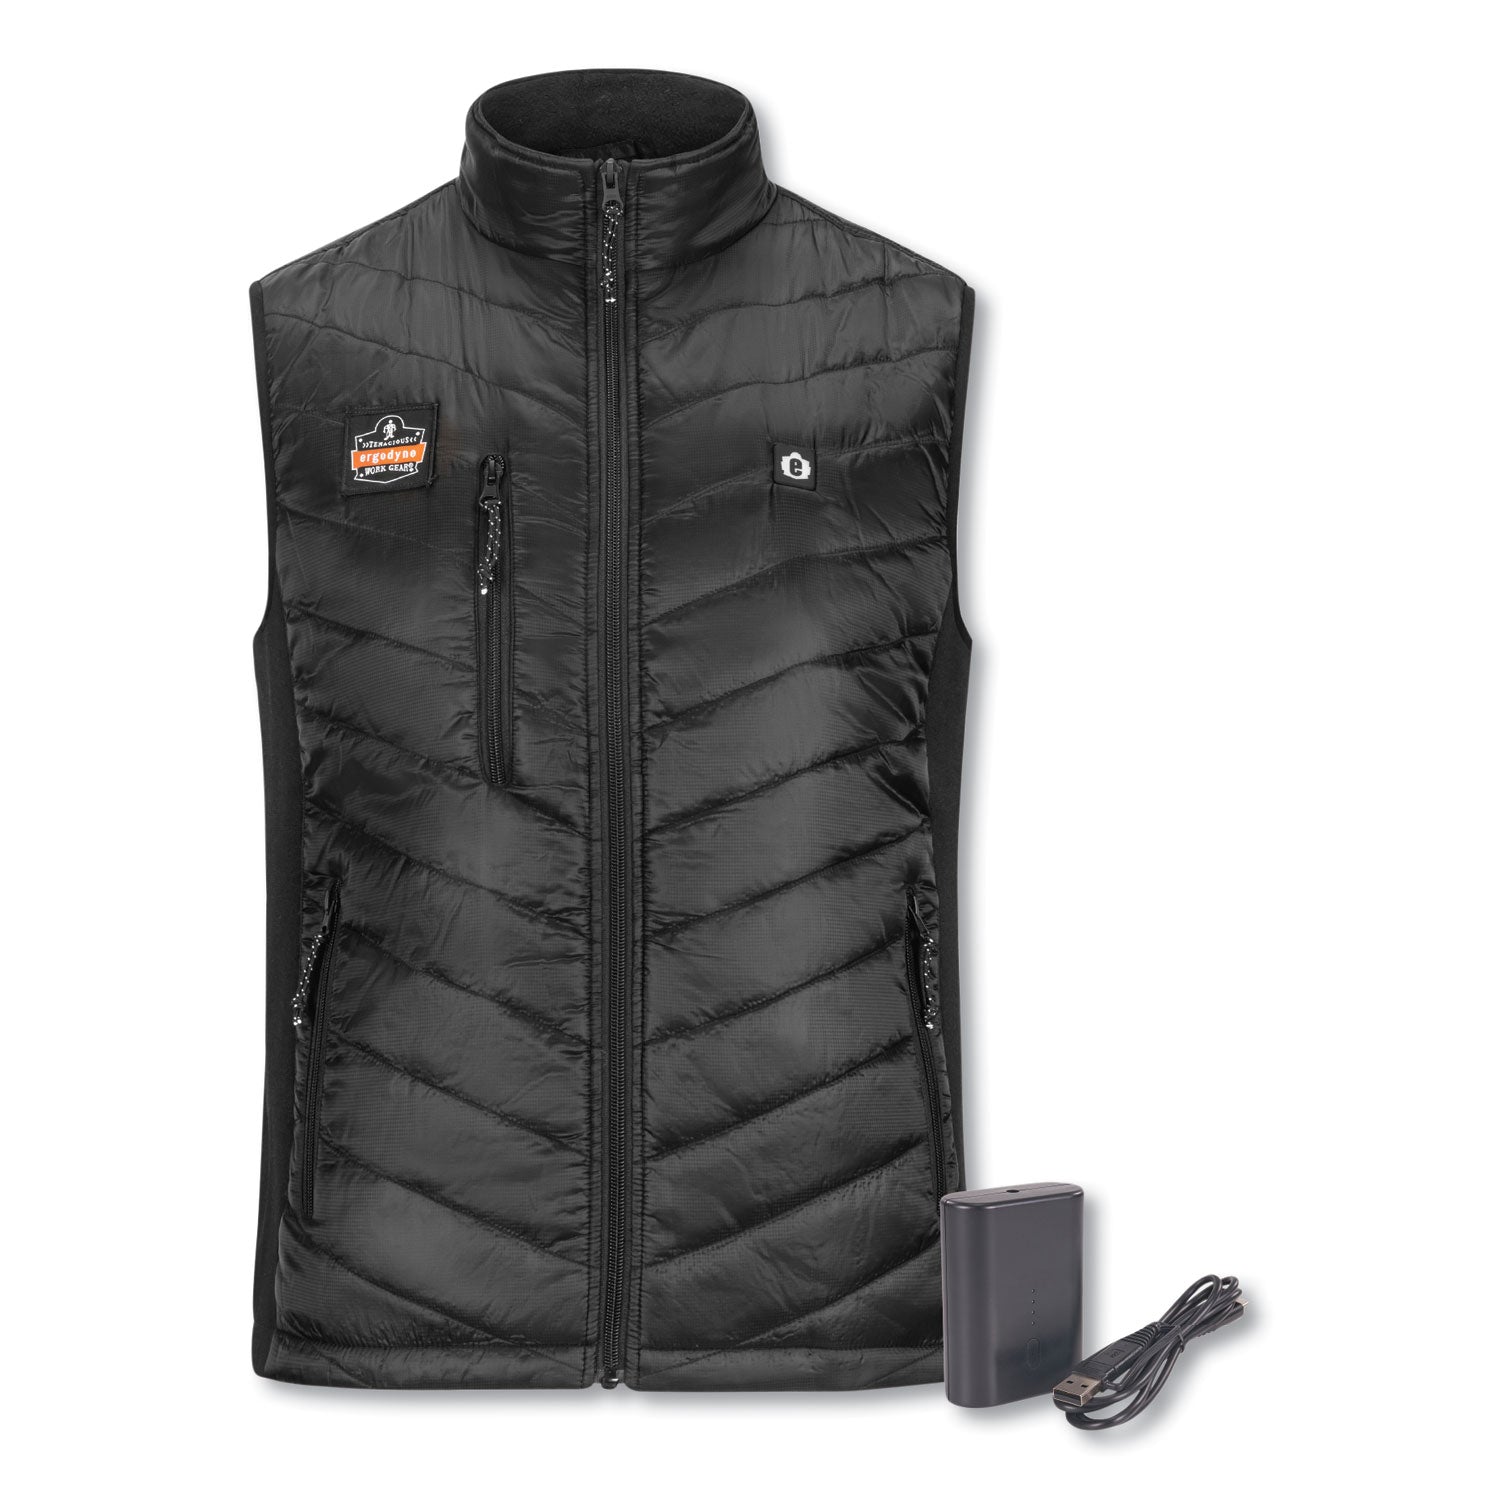 n-ferno-6495-rechargeable-heated-vest-with-battery-power-bank-fleece-polyester-3x-large-black-ships-in-1-3-business-days_ego41706 - 1